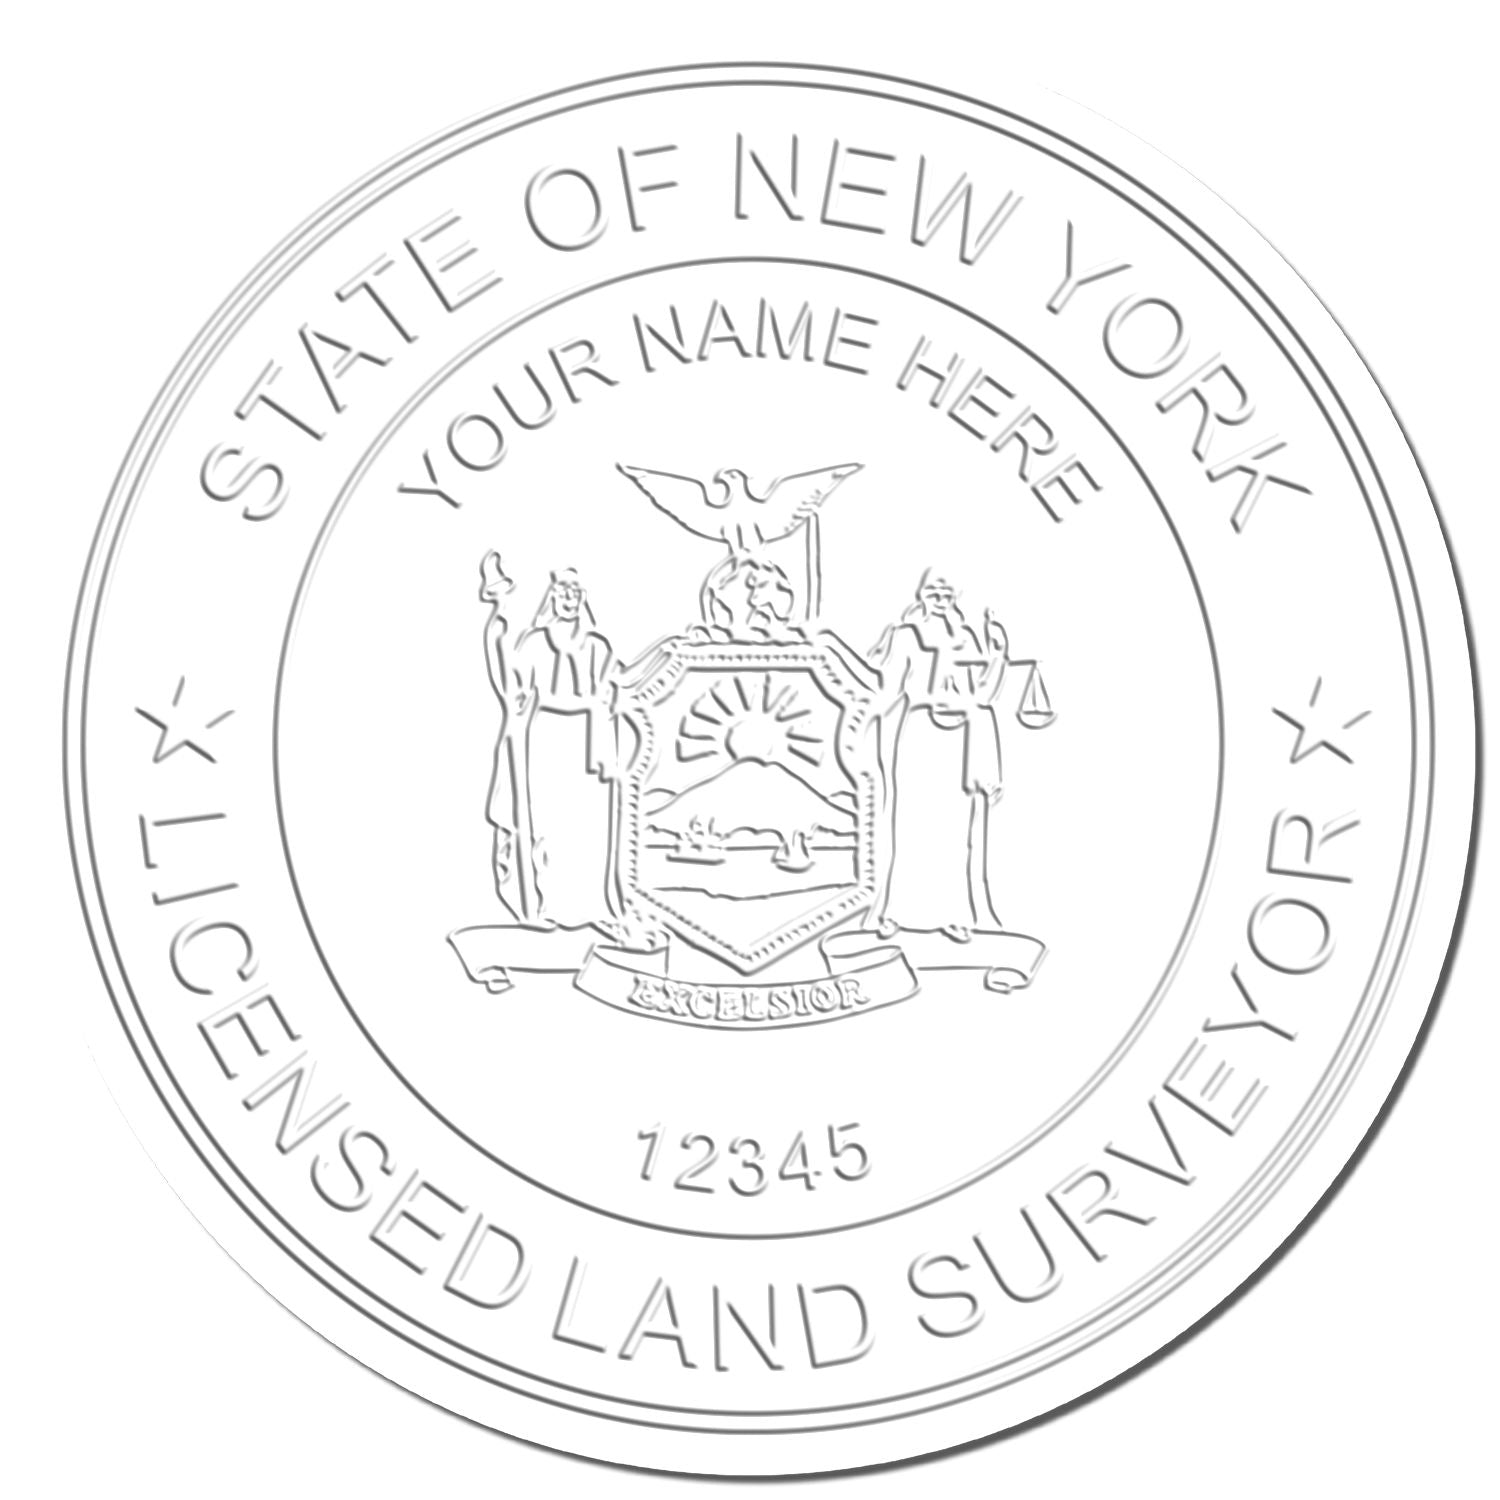 This paper is stamped with a sample imprint of the New York Desk Surveyor Seal Embosser, signifying its quality and reliability.